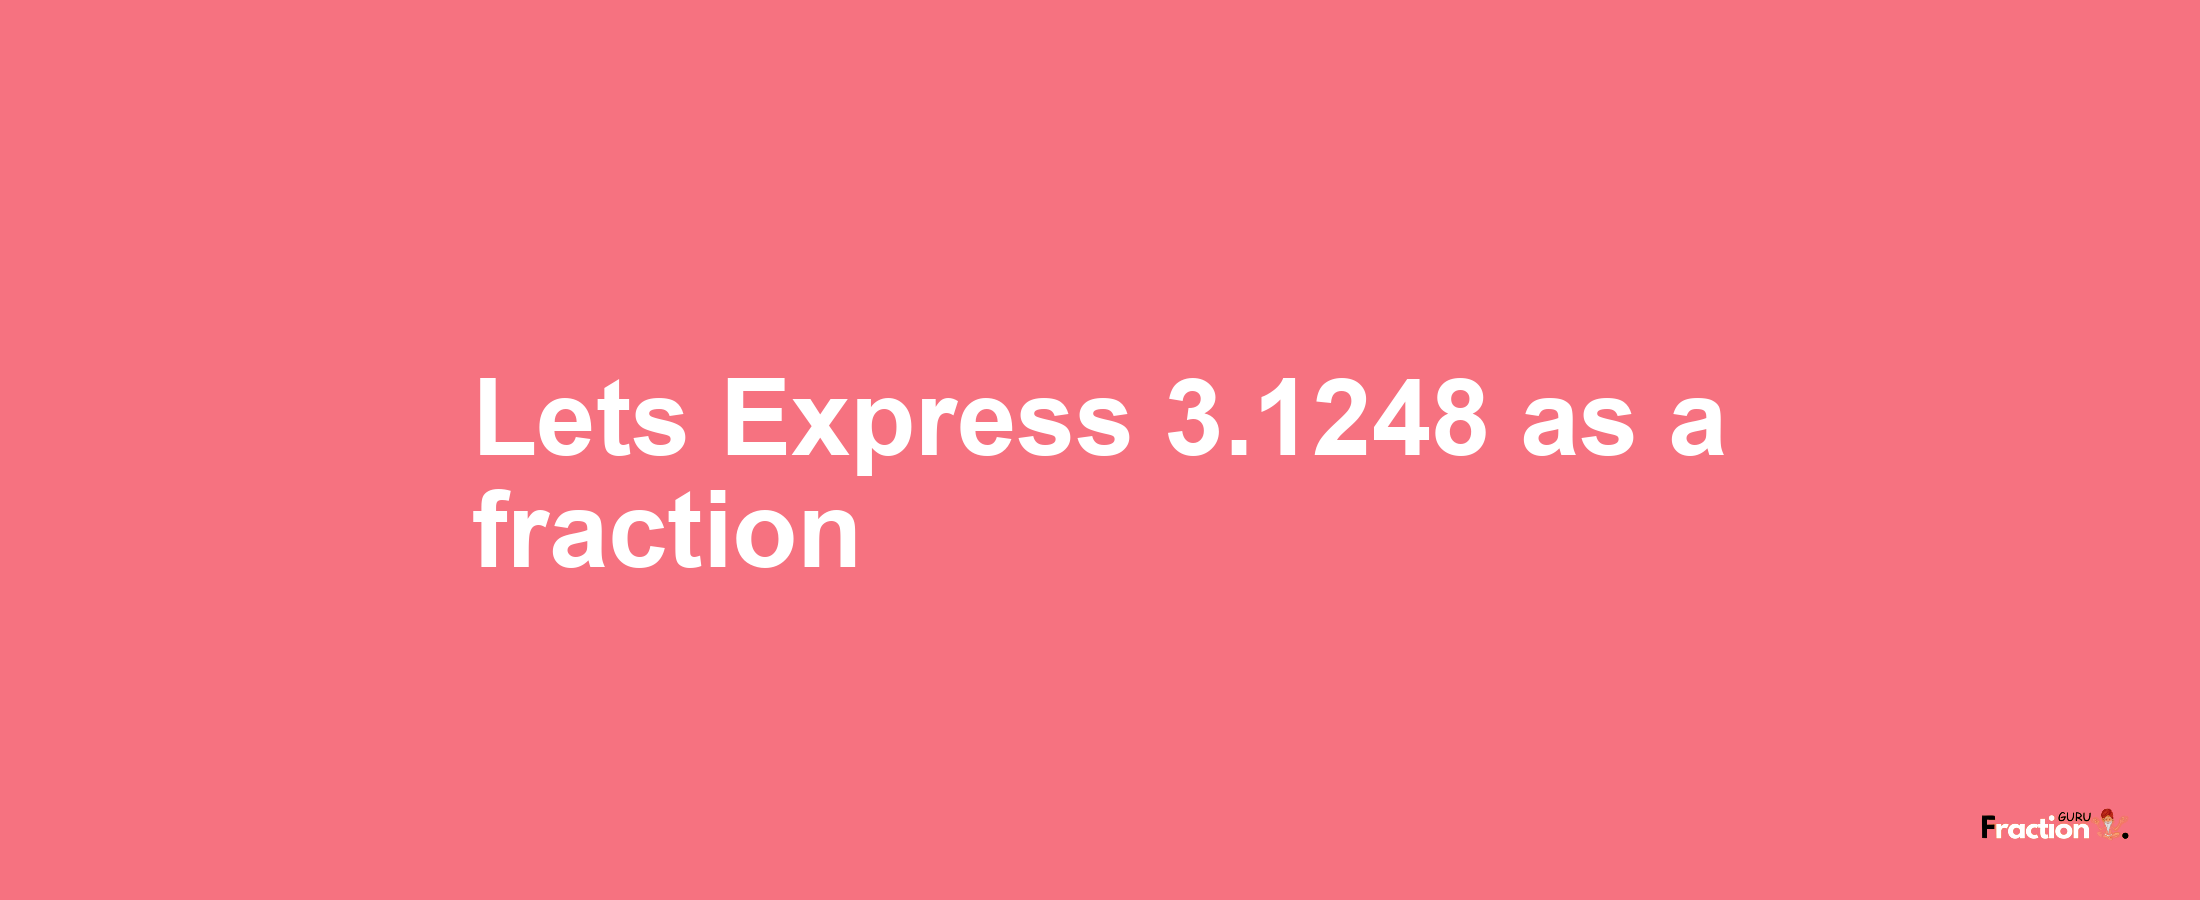 Lets Express 3.1248 as afraction